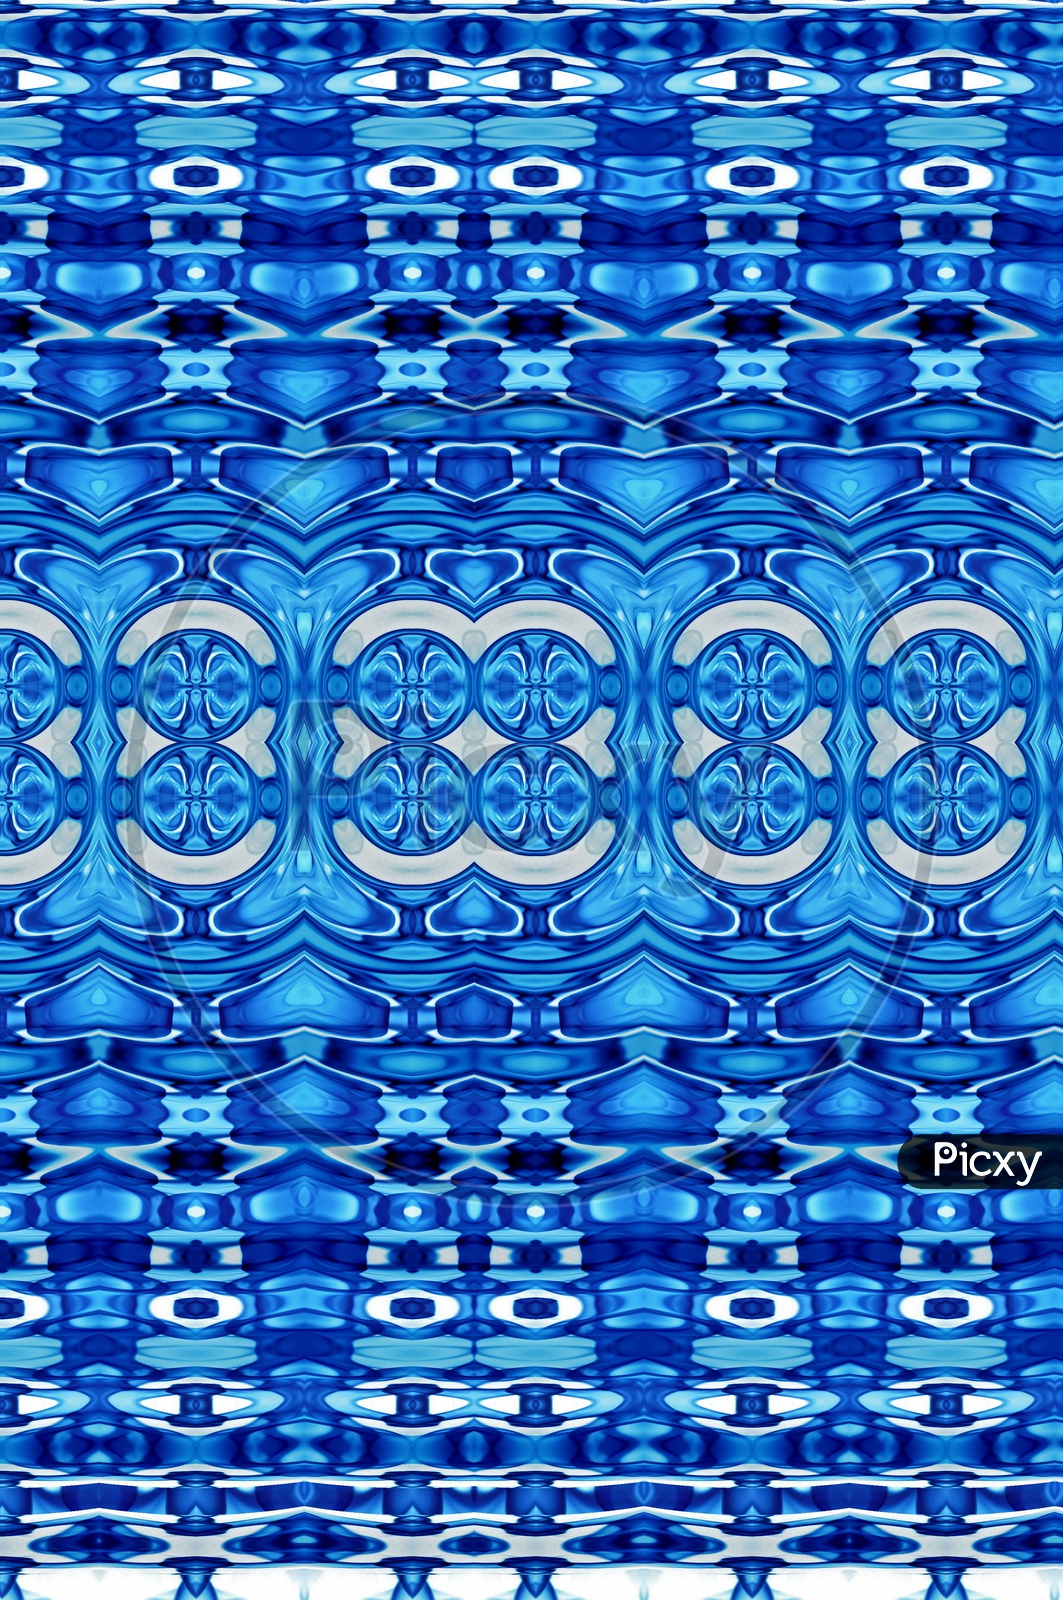 Abstract Background With Patterns And Designs